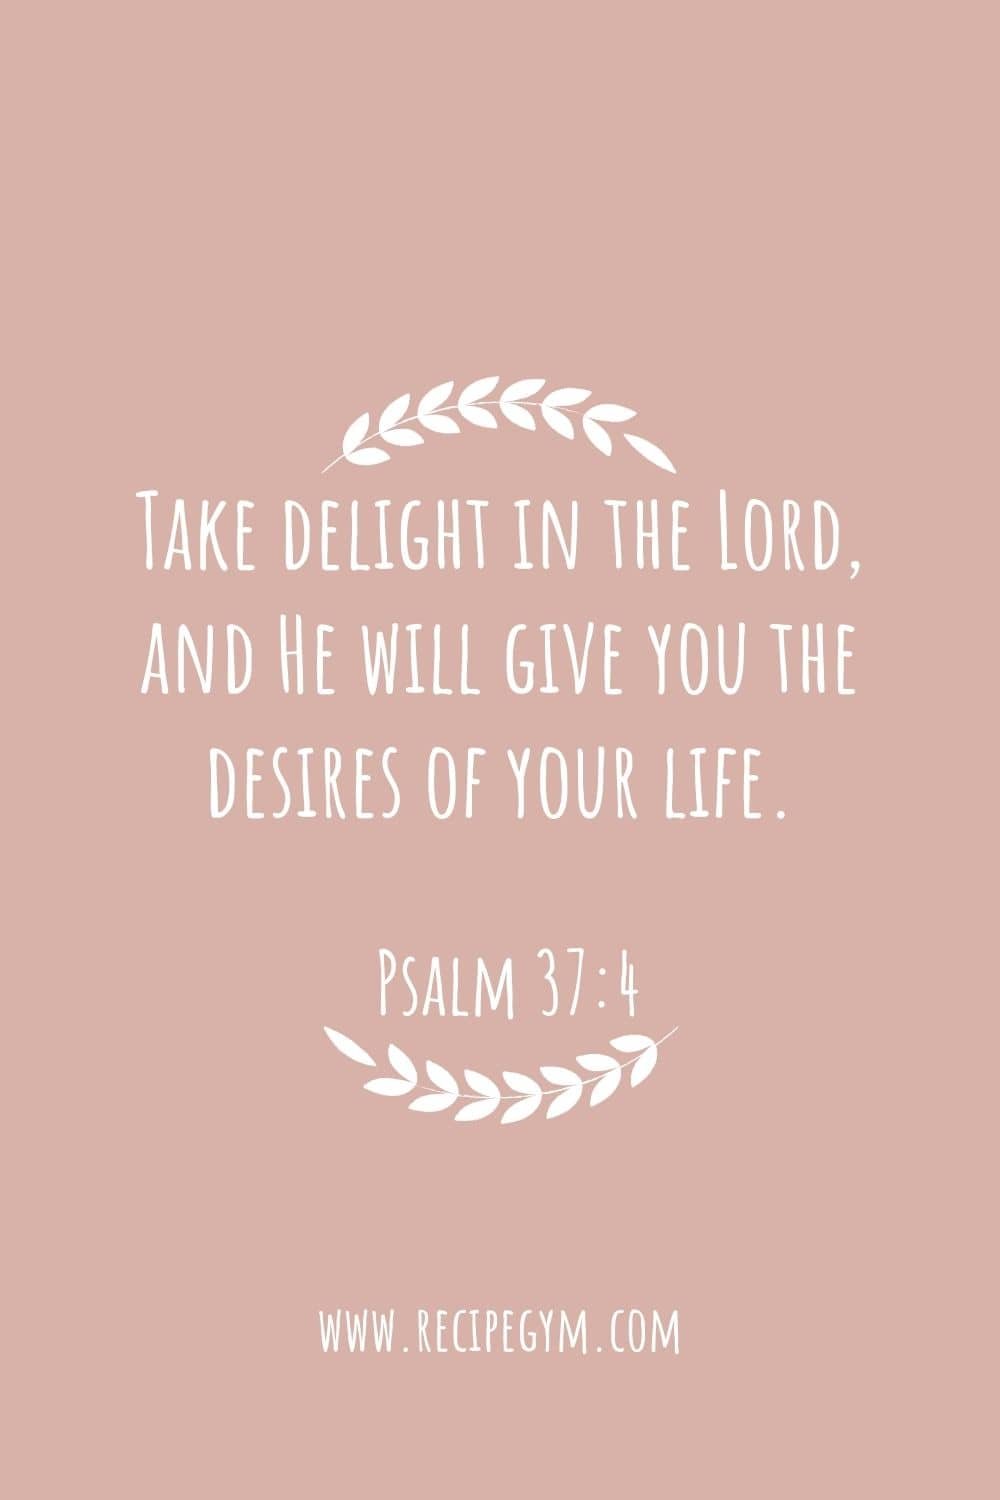 3P Take delight in the Lord and He will give you the desires of your life